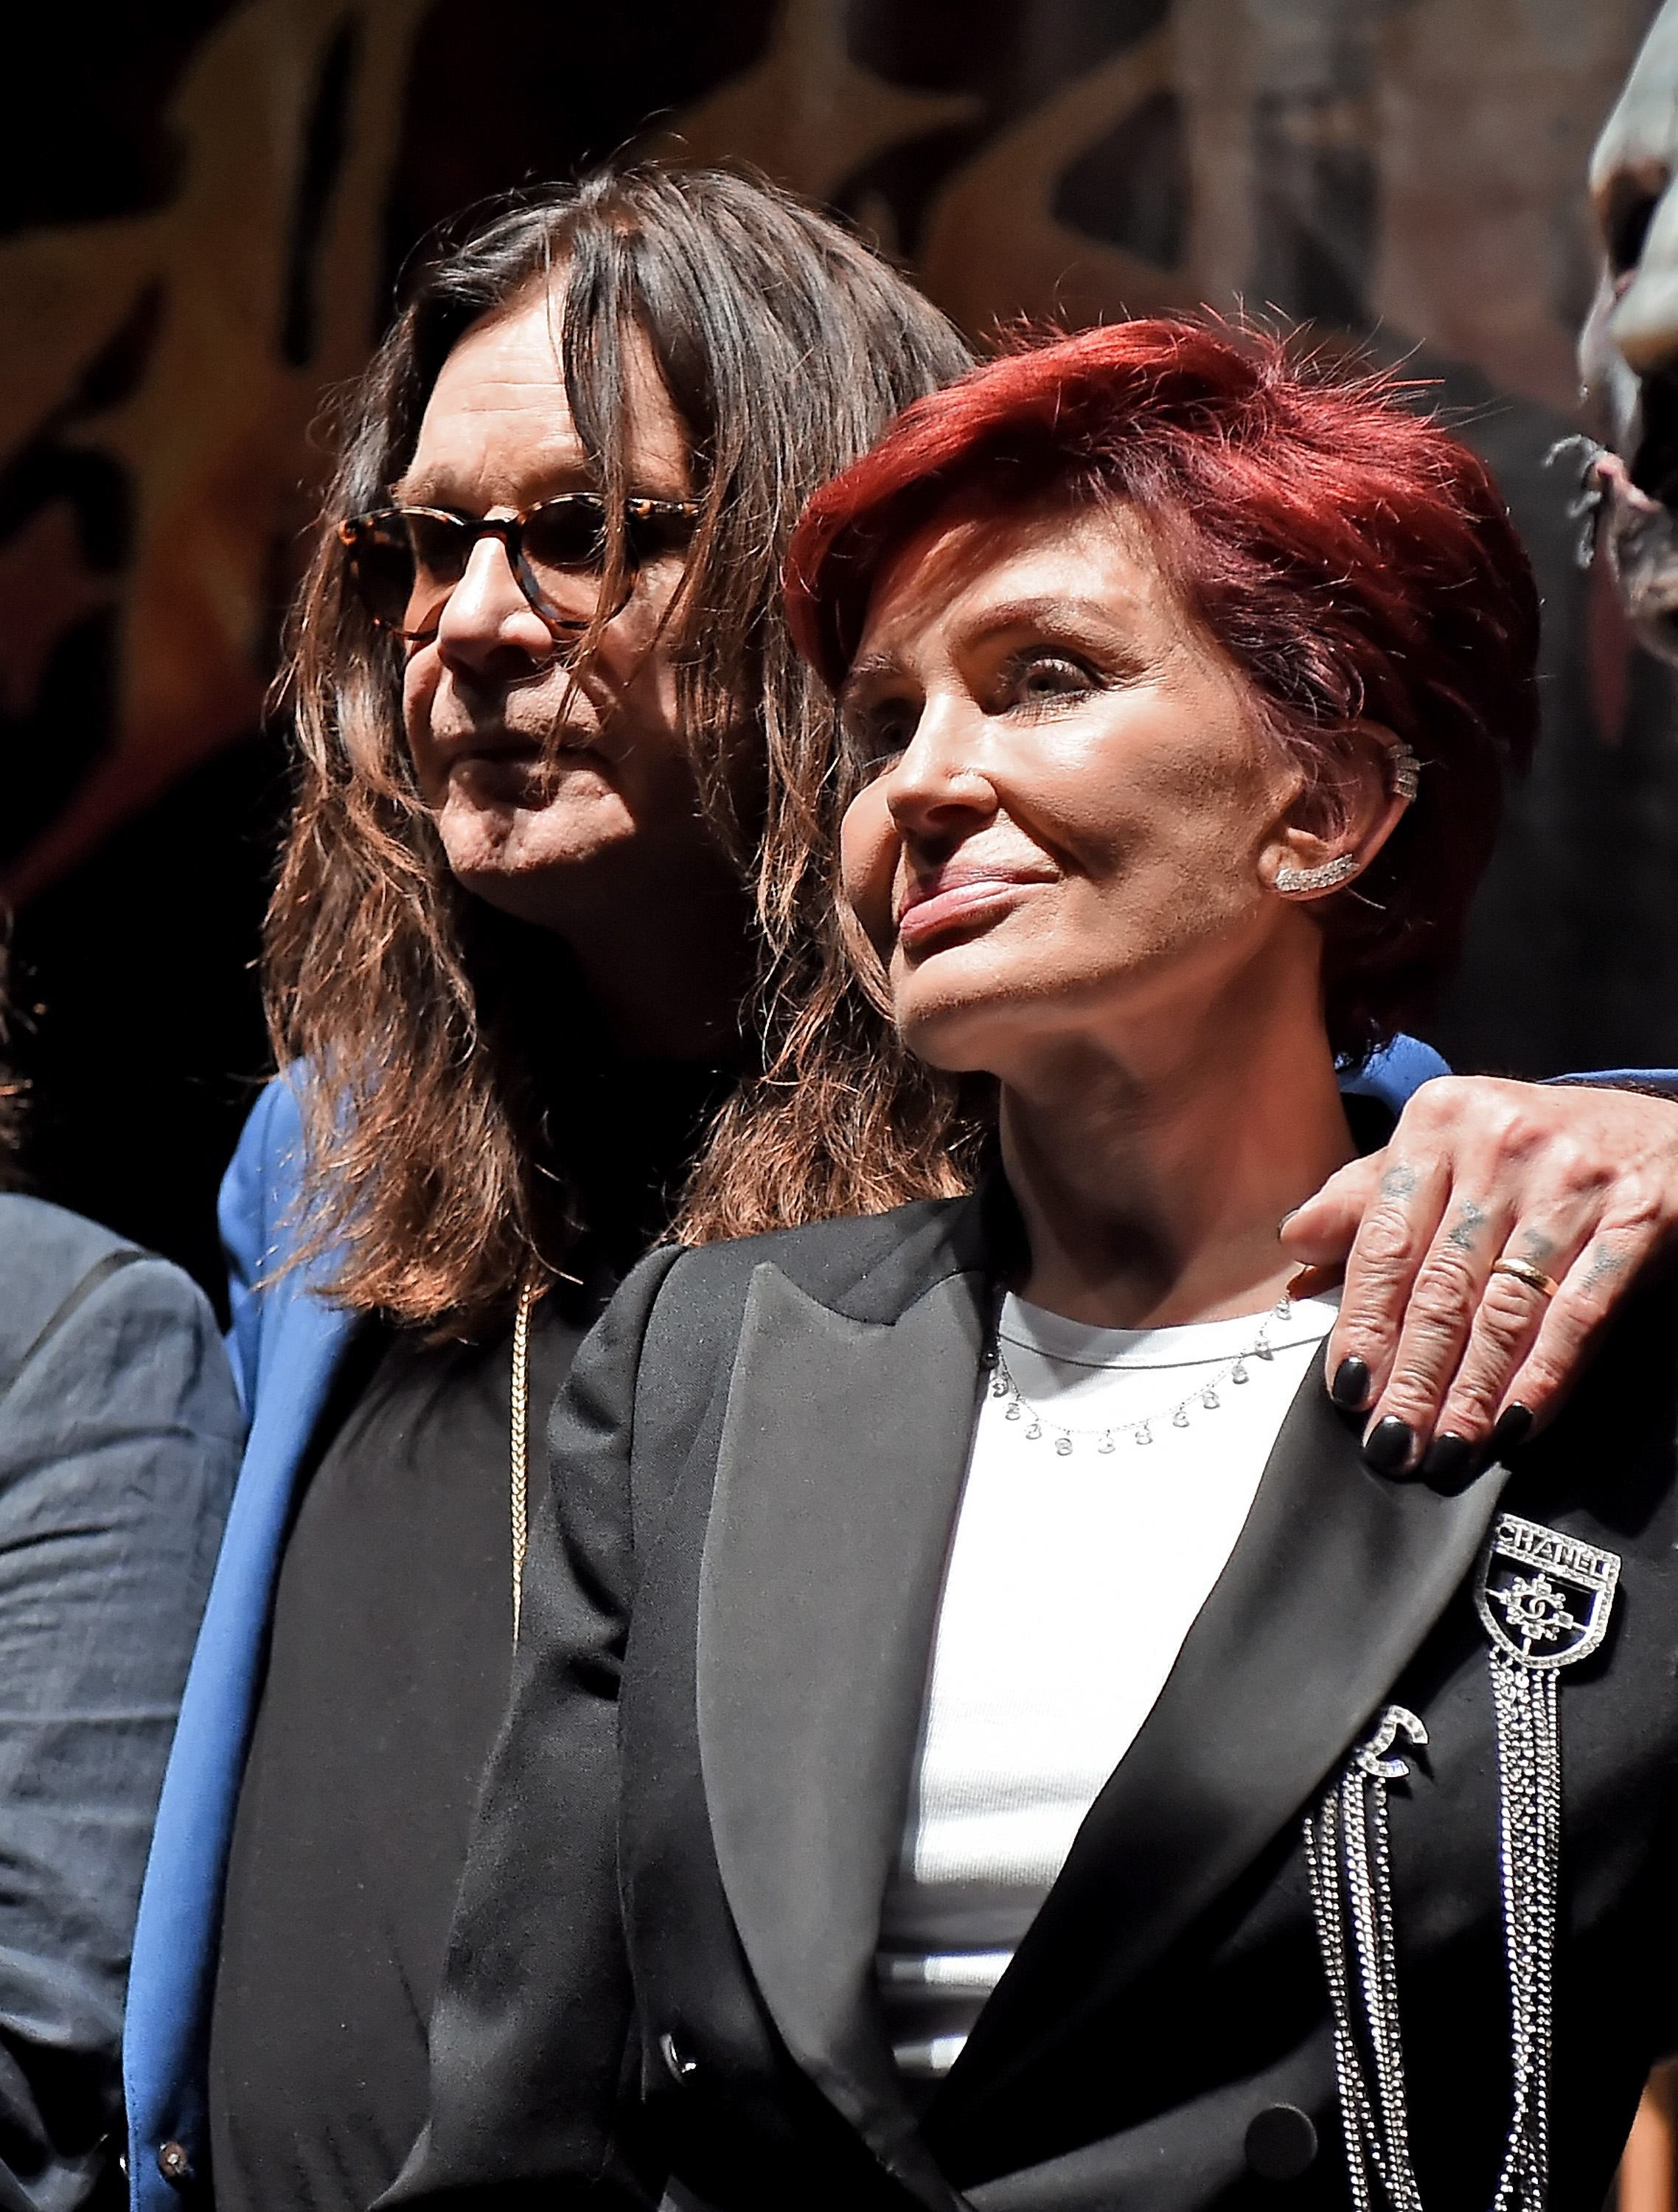 Ozzy and Sharon Osbourne at the Ozzy Osbourne and Corey Taylor special announcement in Hollywood, California, on May 12, 2016 | Source: Getty Images